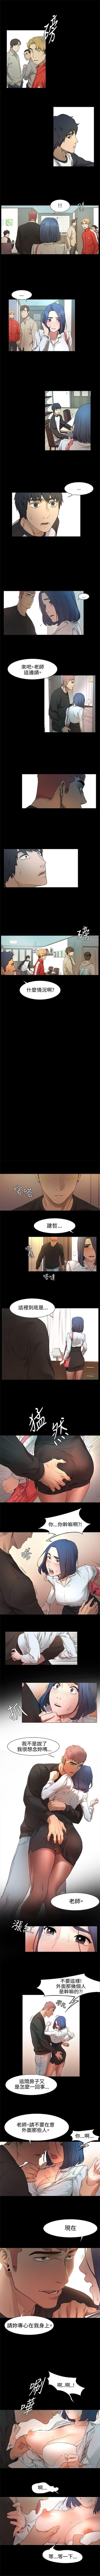 Fuck Her Hard 衝突 1-106 官方中文（連載中） Boys - Page 11